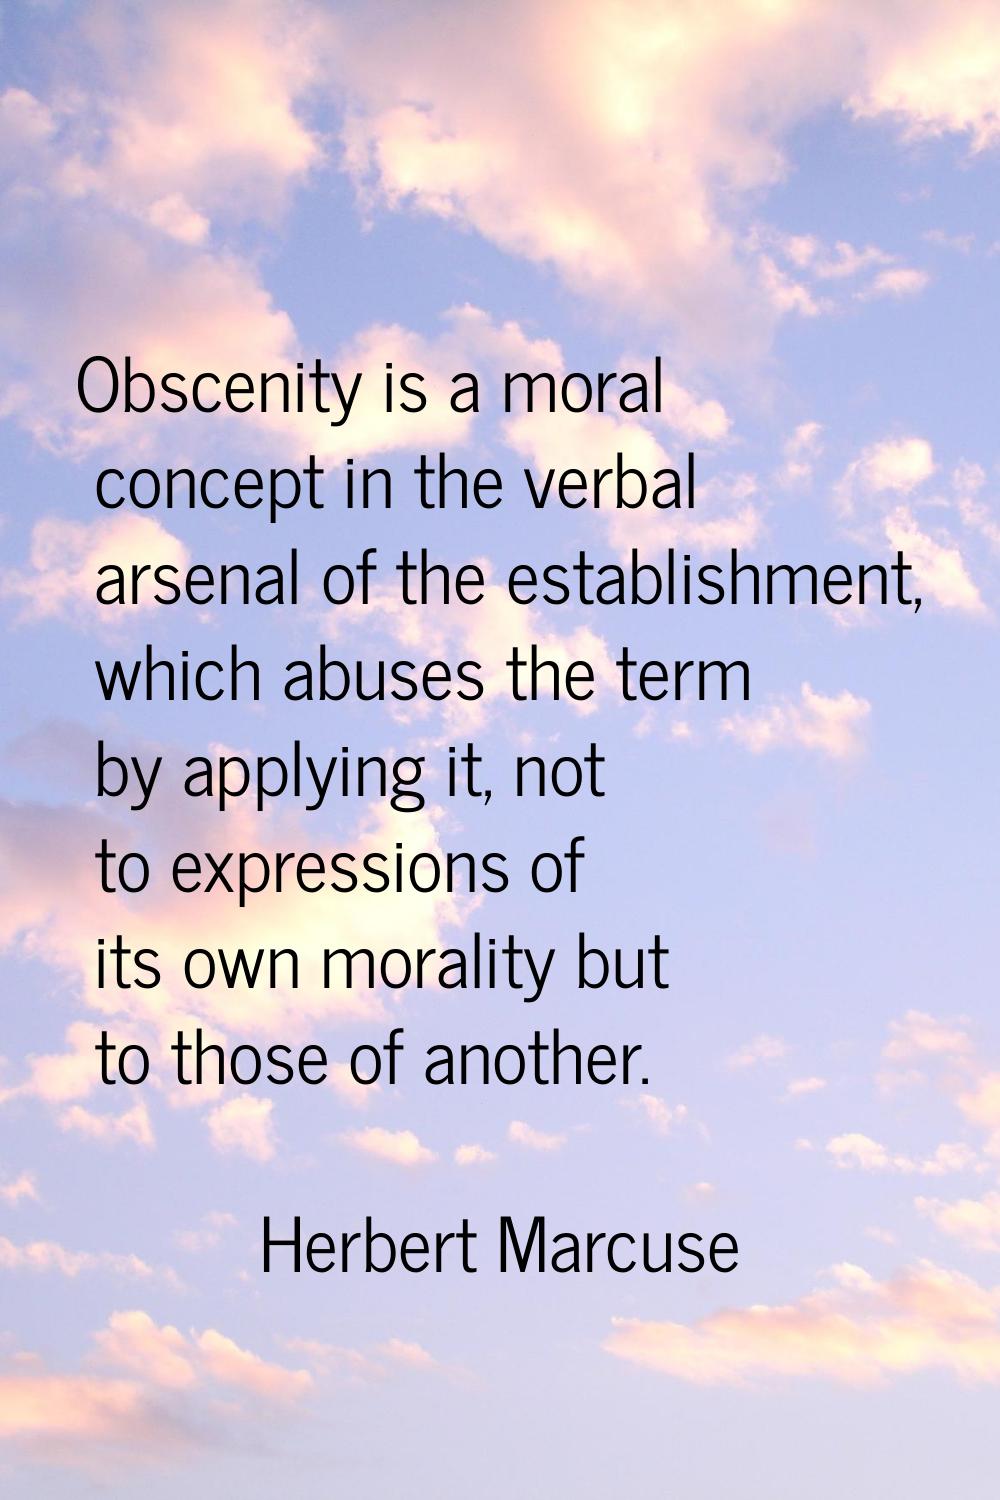 Obscenity is a moral concept in the verbal arsenal of the establishment, which abuses the term by a